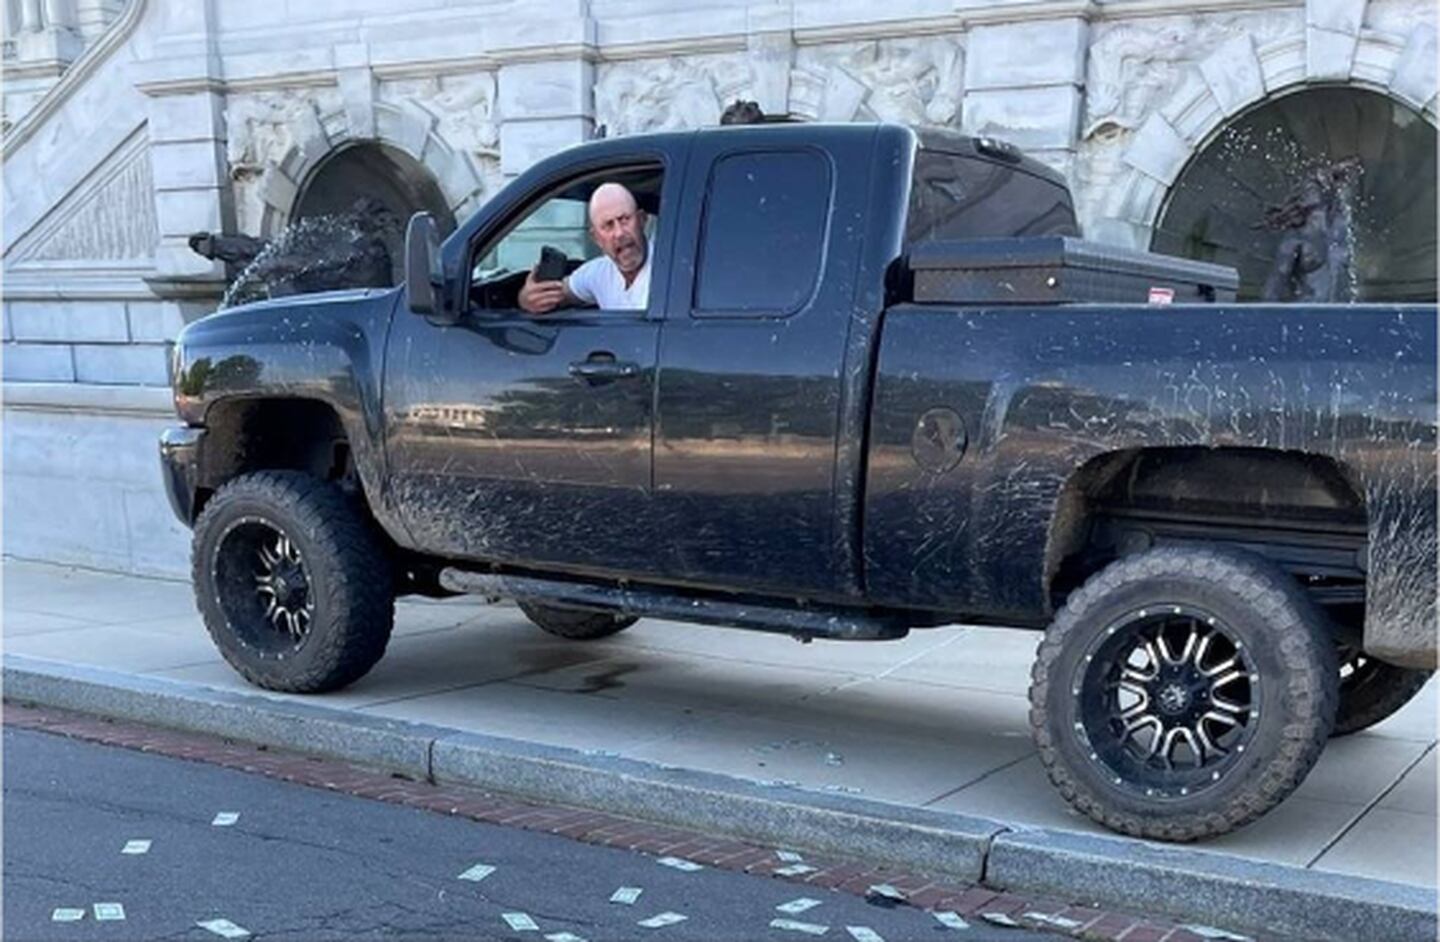 North Carolina man who claimed to have bomb in a pickup truck near the U.S. Capitol has surrendered to law enforcement, ending an hourslong standoff on Thursday.